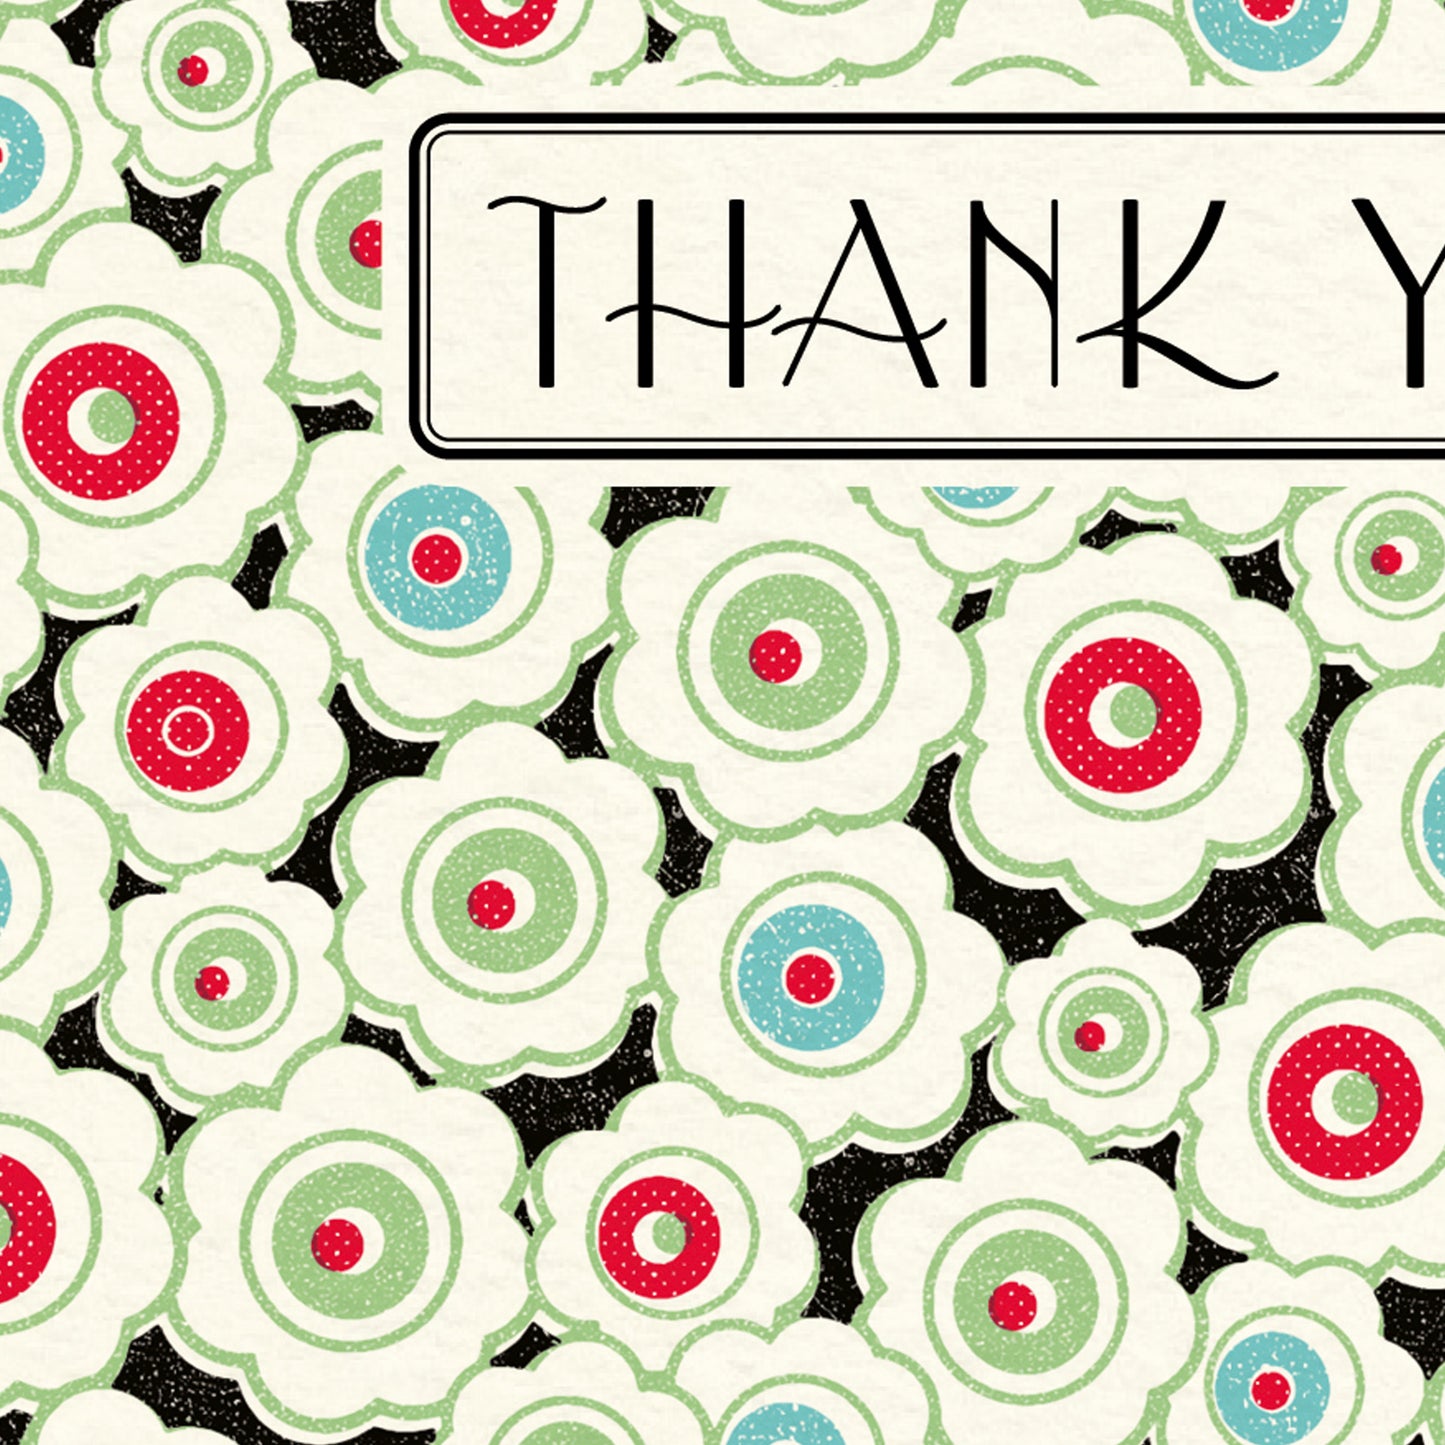 Just Thanks: Deco Floral